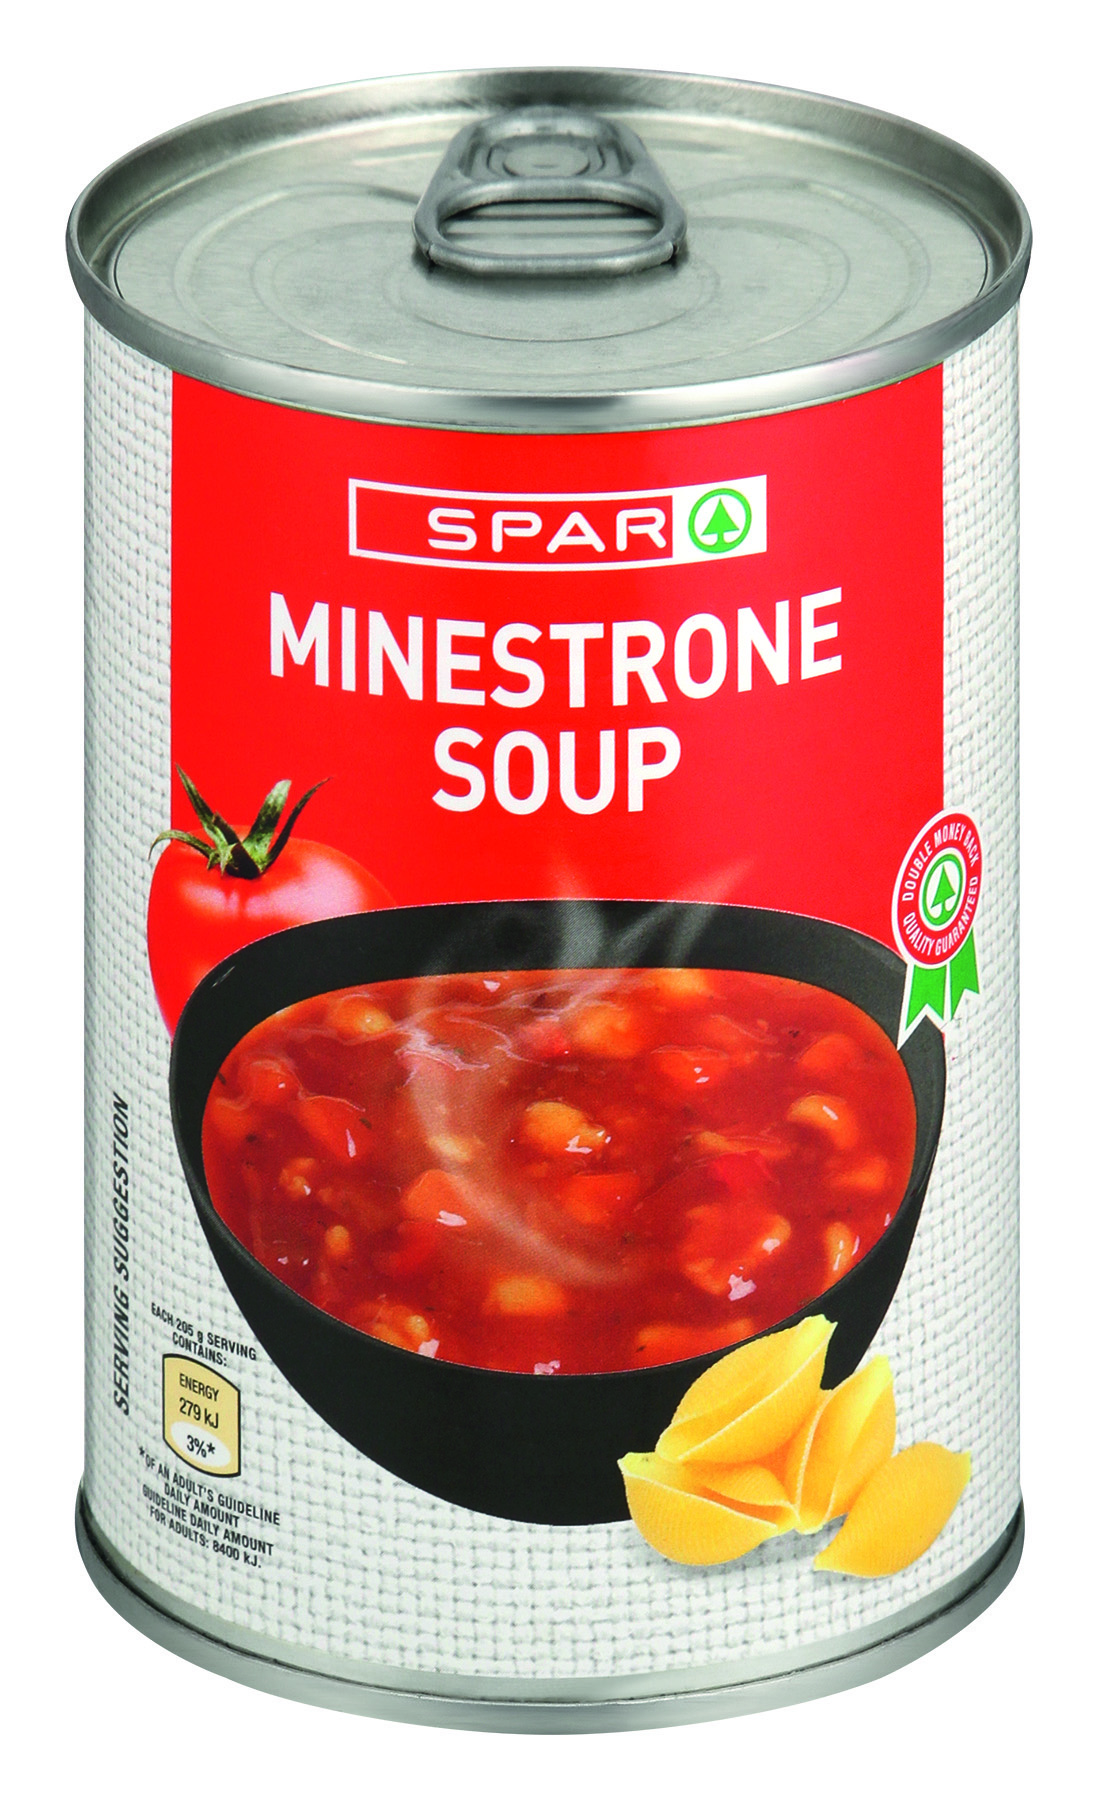 canned soup - minestrone soup